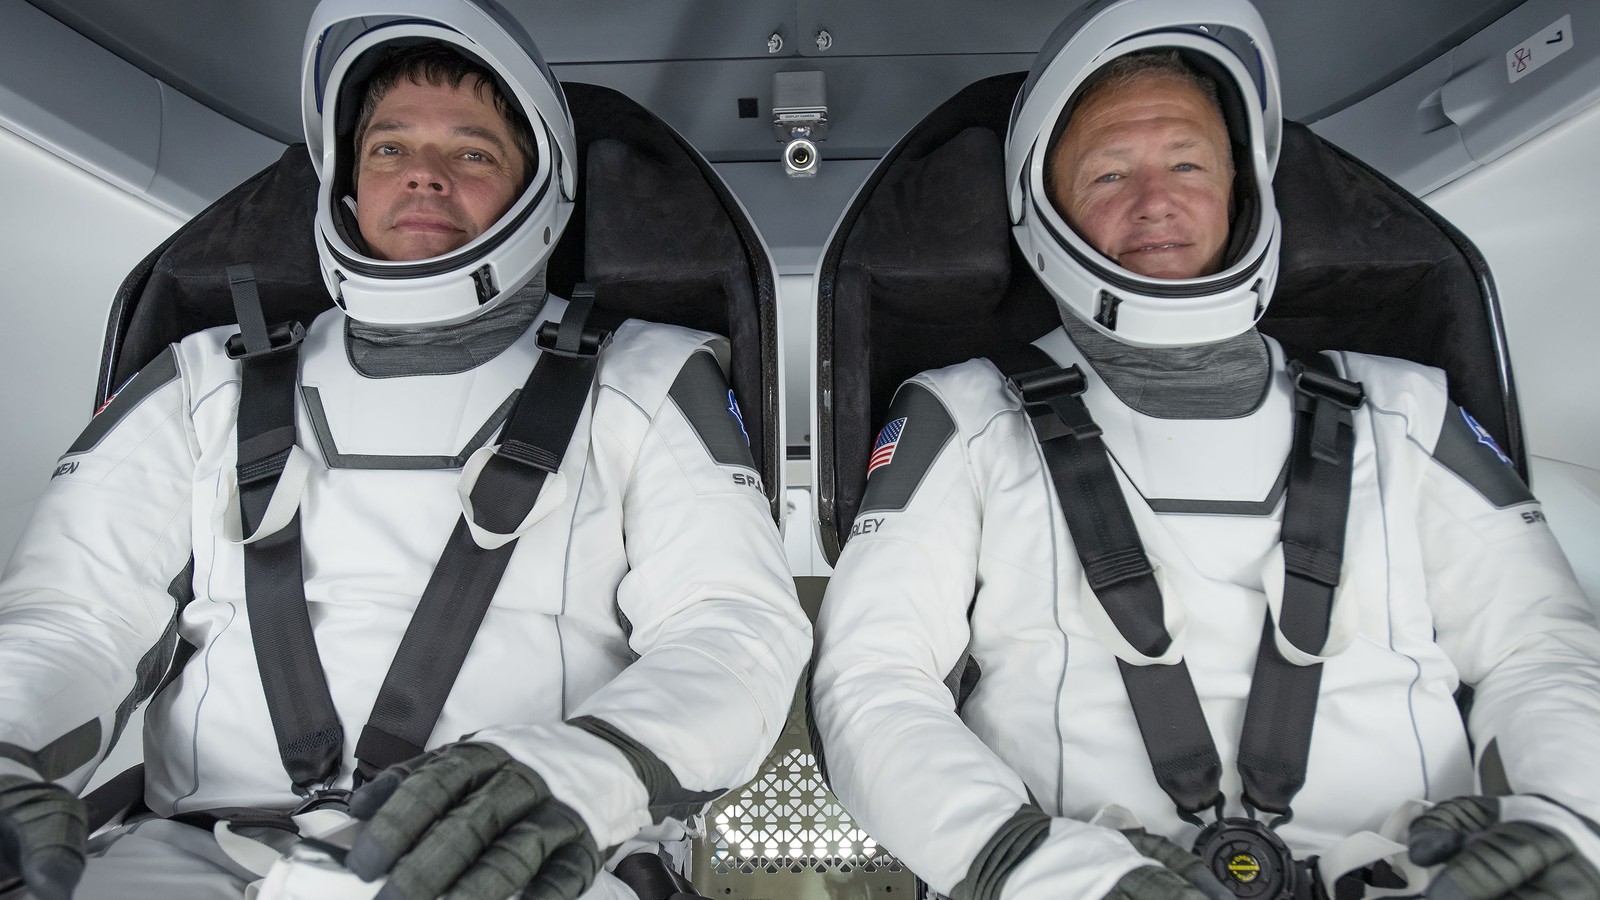 SpaceX astronauts train and speak on Shatner’s rocket trip